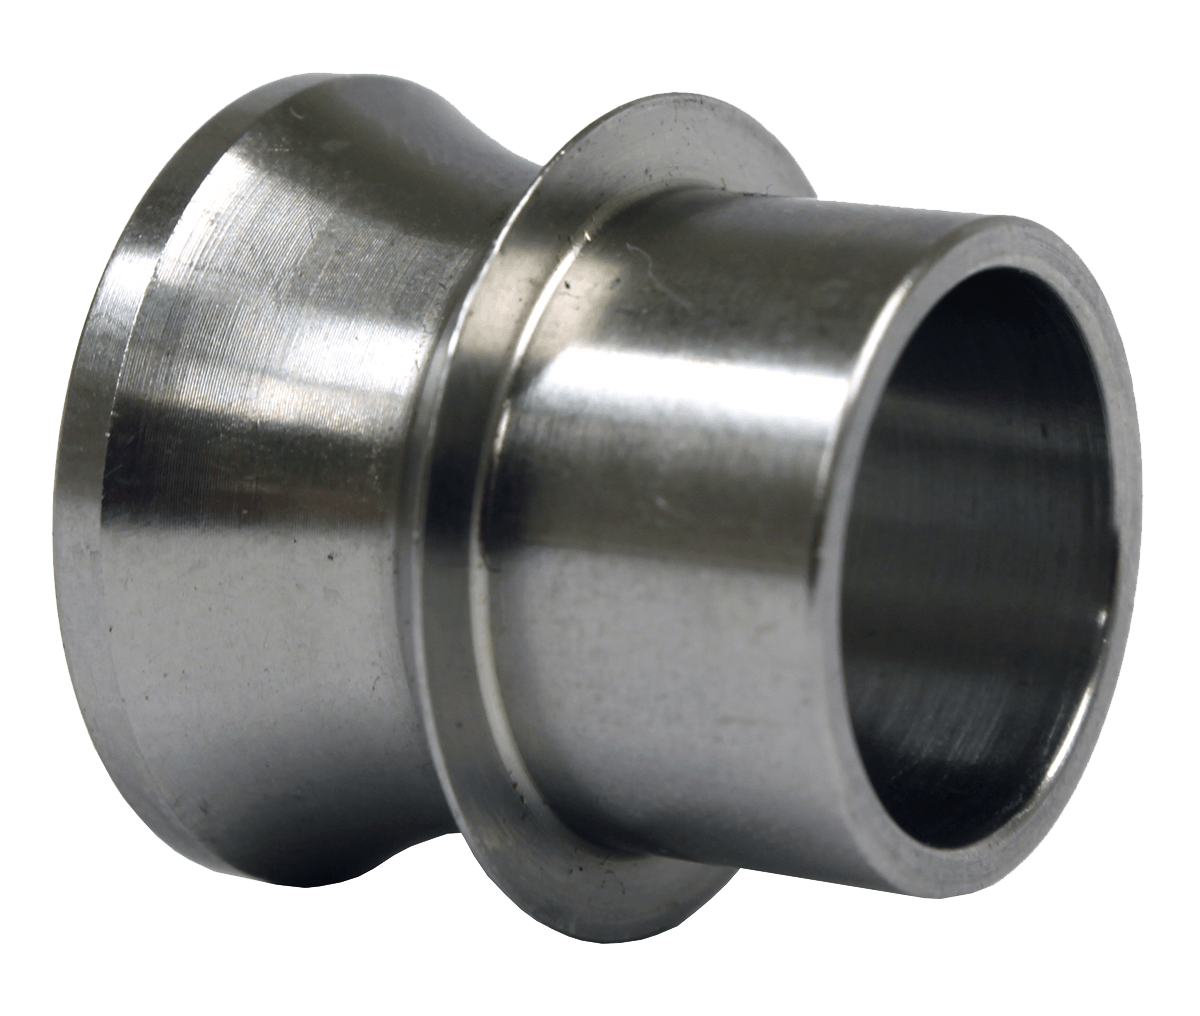 QA1 SN12-68 High Misalignment Spacer, .75 inch Od Ss, .375 inch X 1.75 inch Total Width